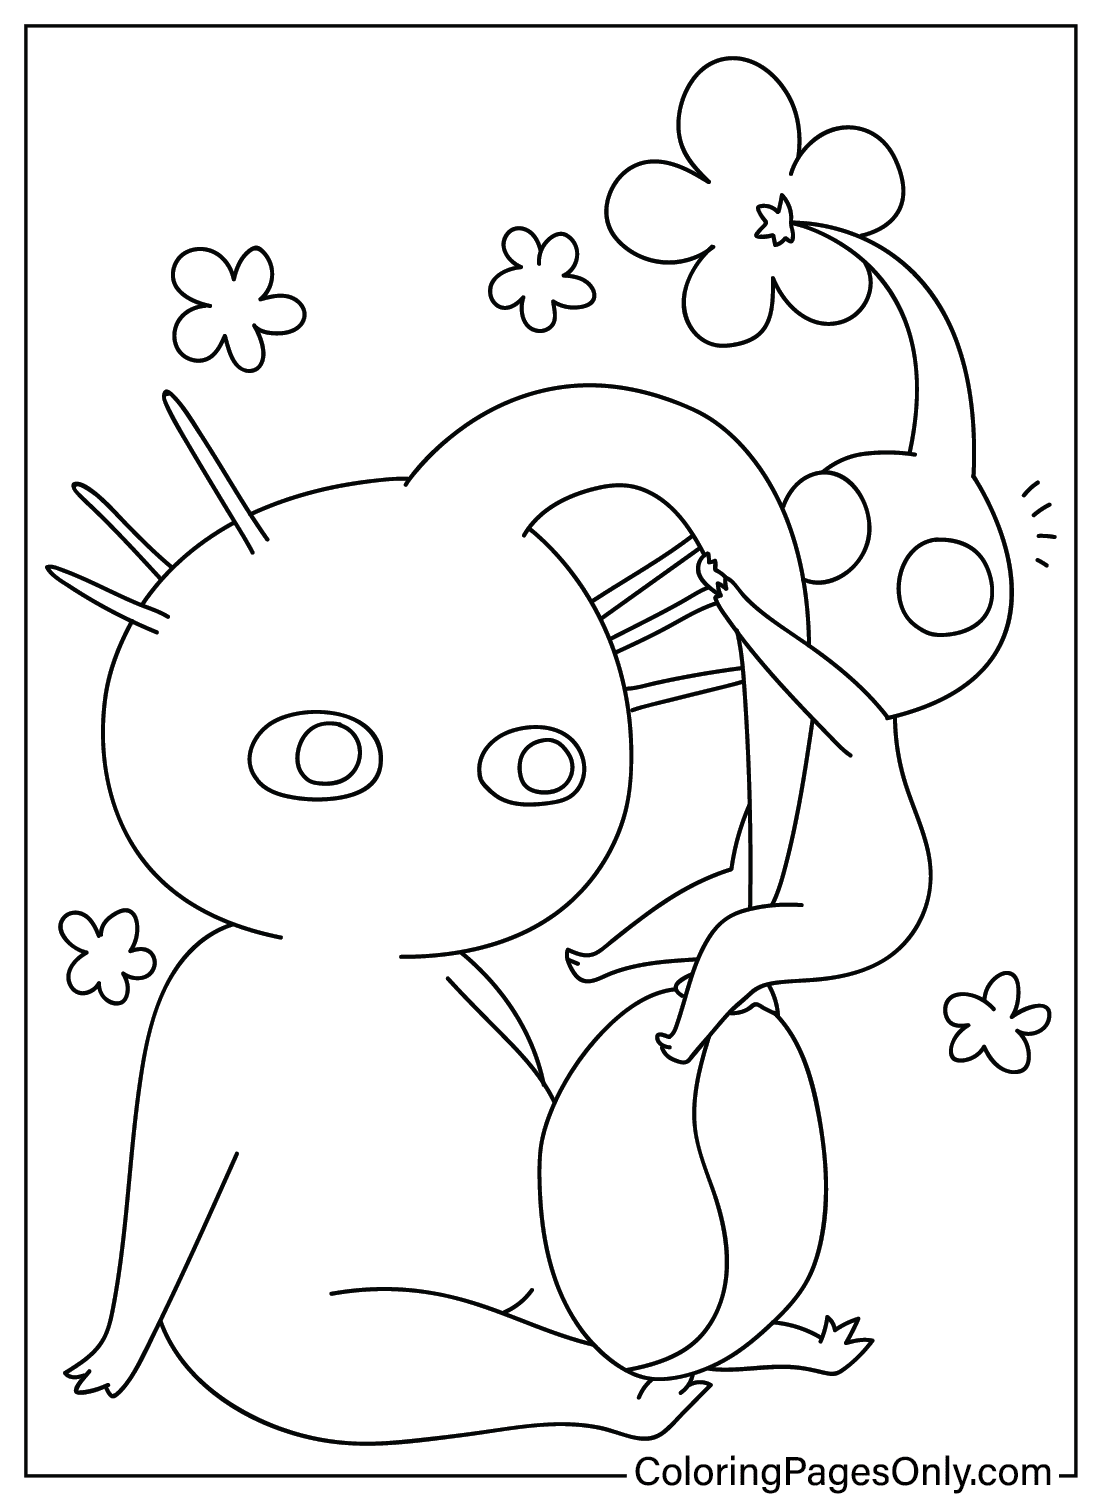 Pikmin Coloring Page Printable from Pikmin